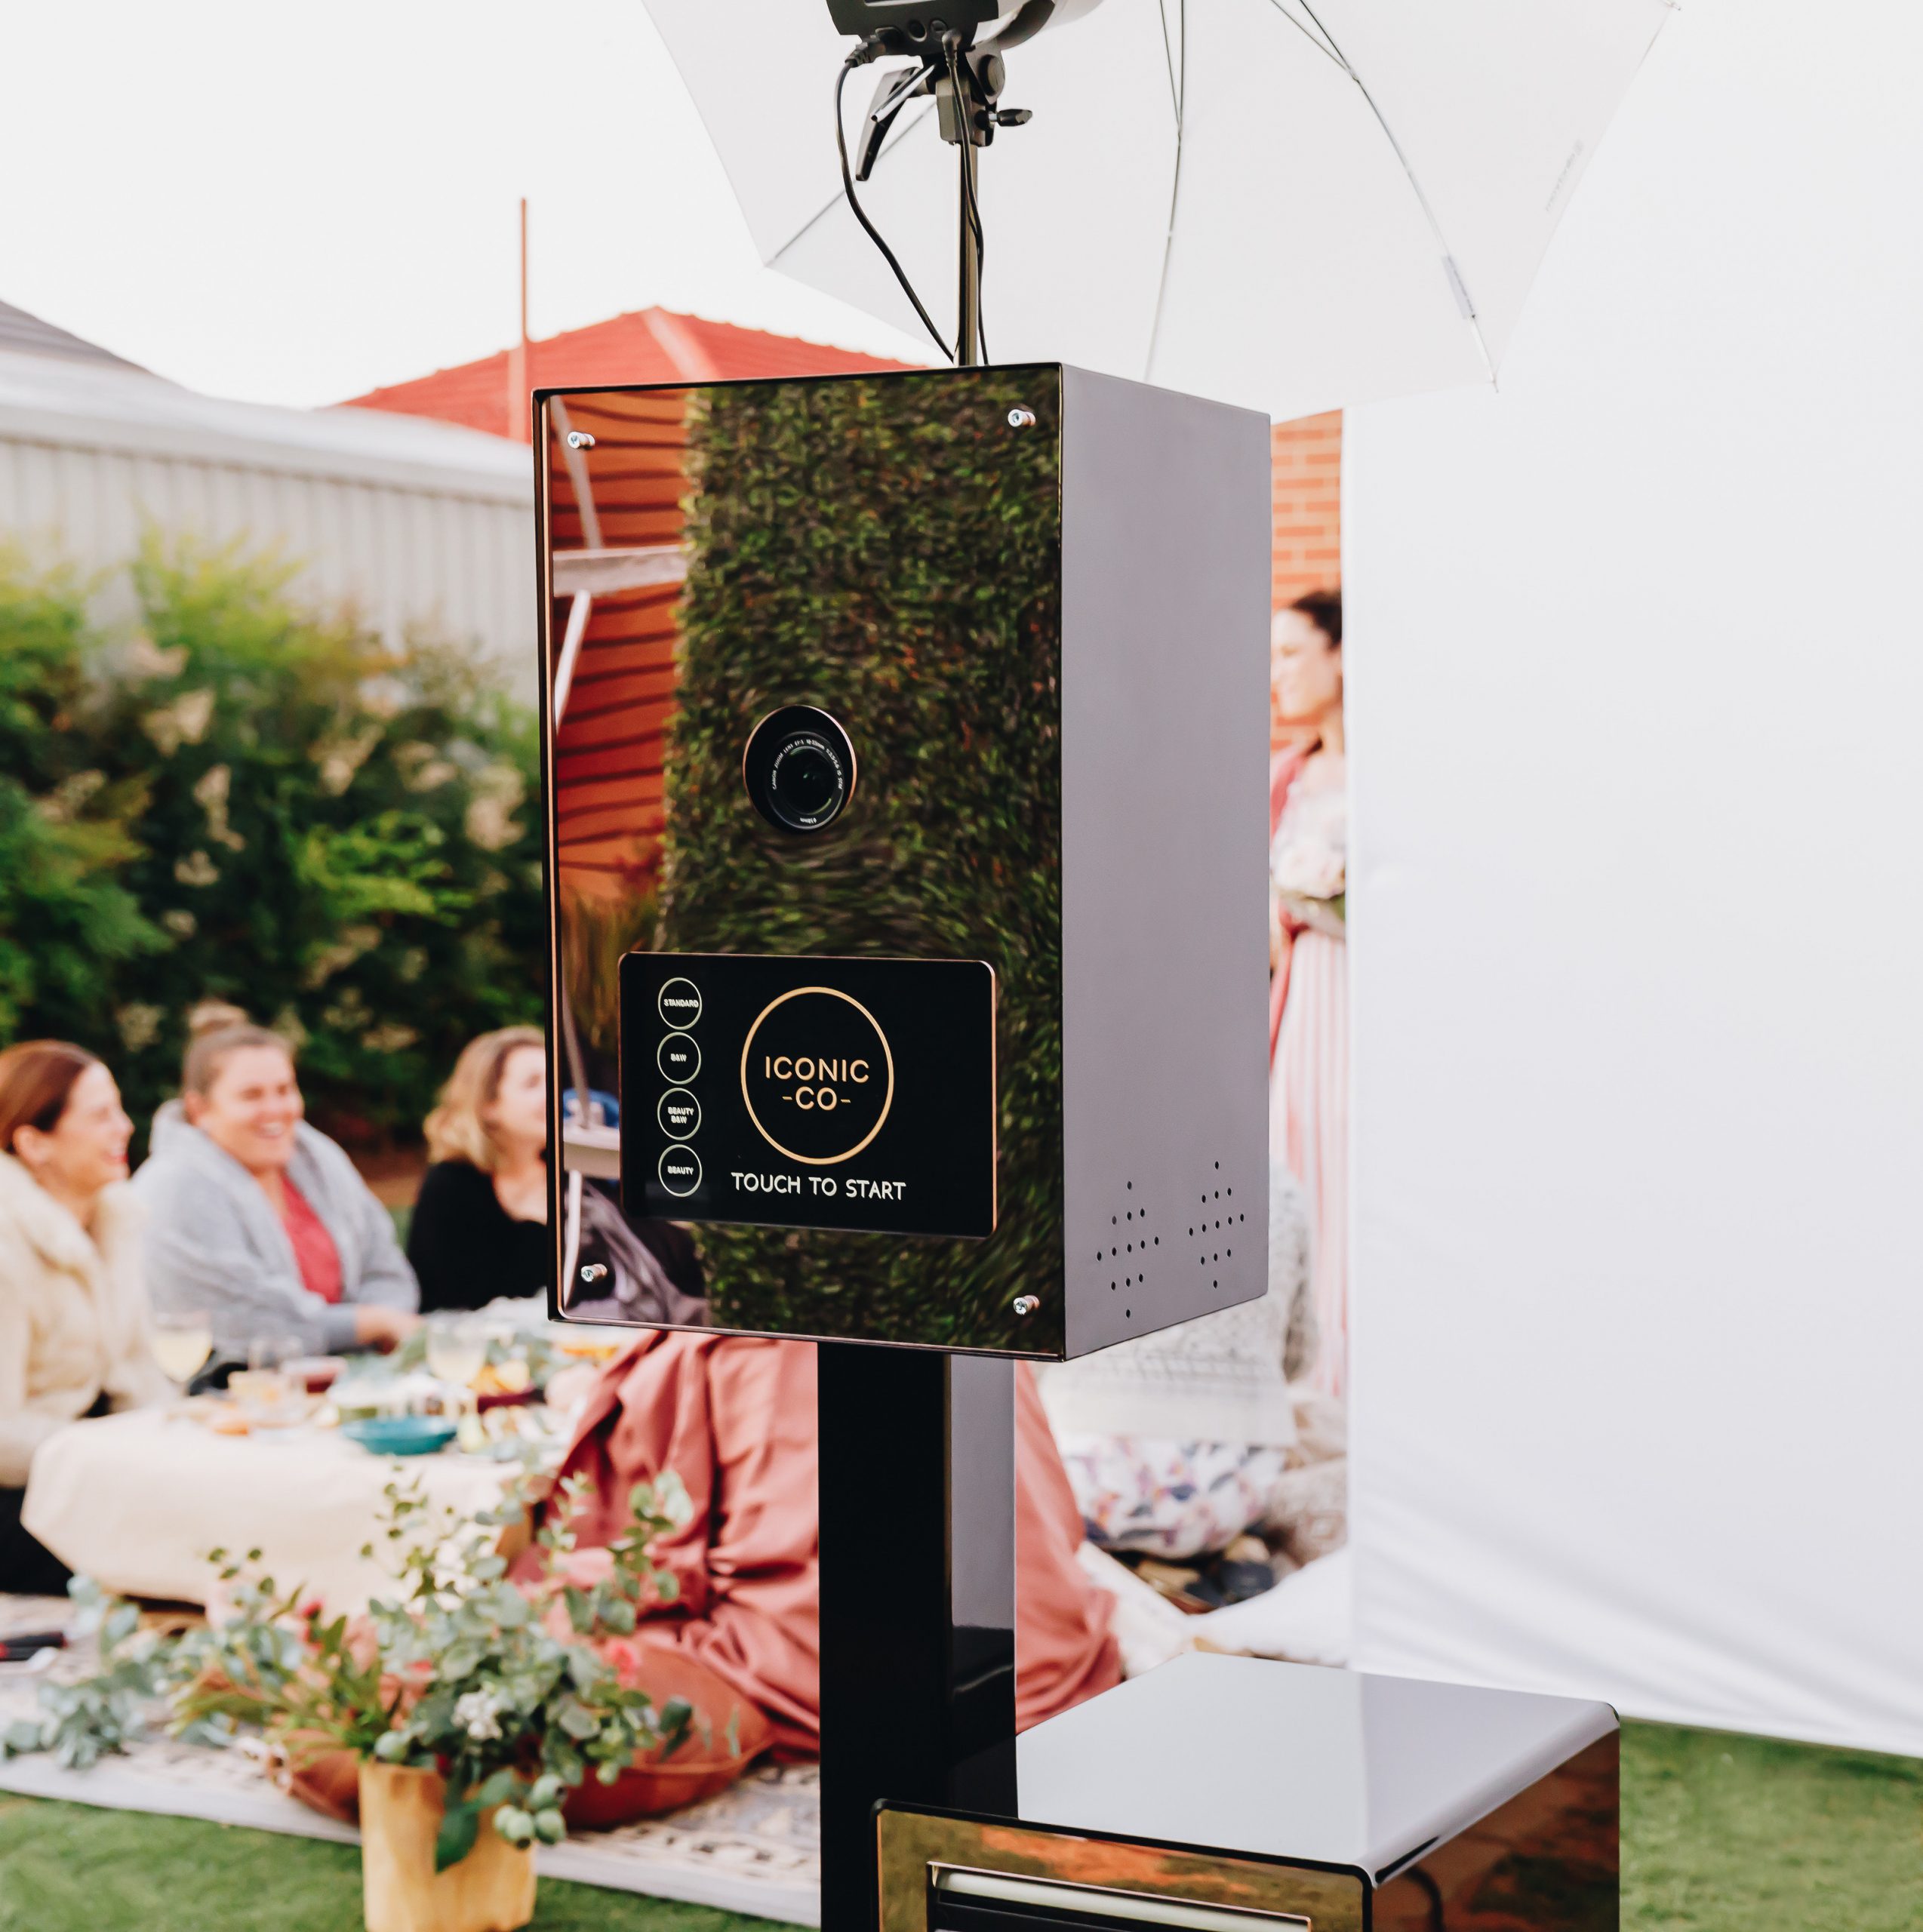 WIN a 3 hour Rose Gold Photobooth package for your next event, thanks to Iconic Co Photobooth